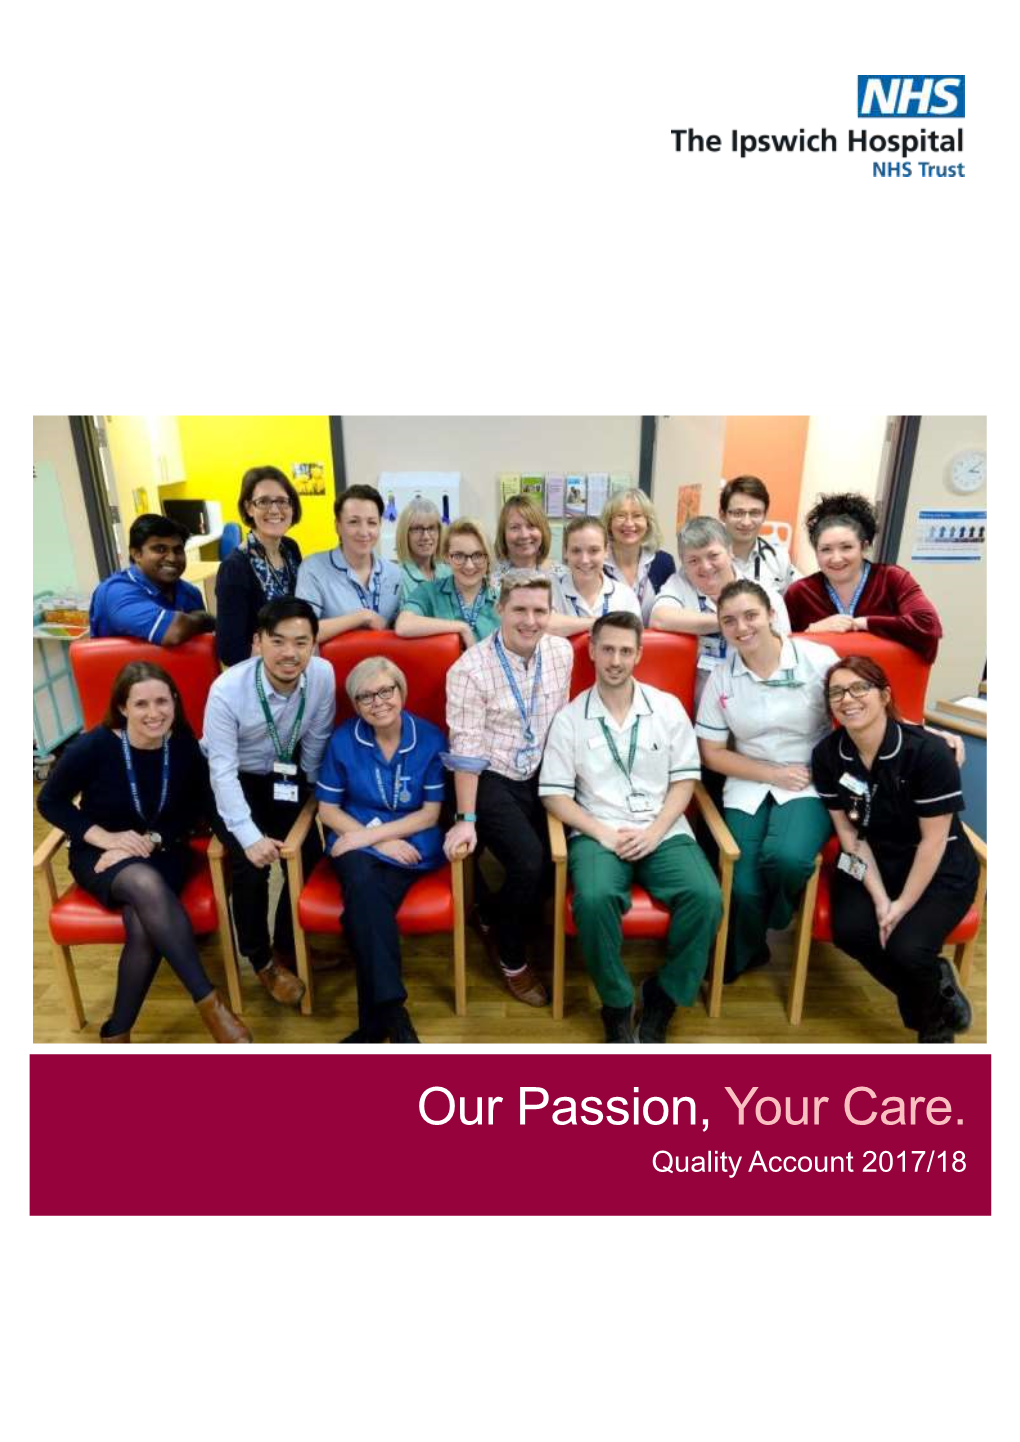 Our Passion, Your Care. Quality Account 2017/18 the Ipswich Hospital NHS Trust—Quality Account 2017/18